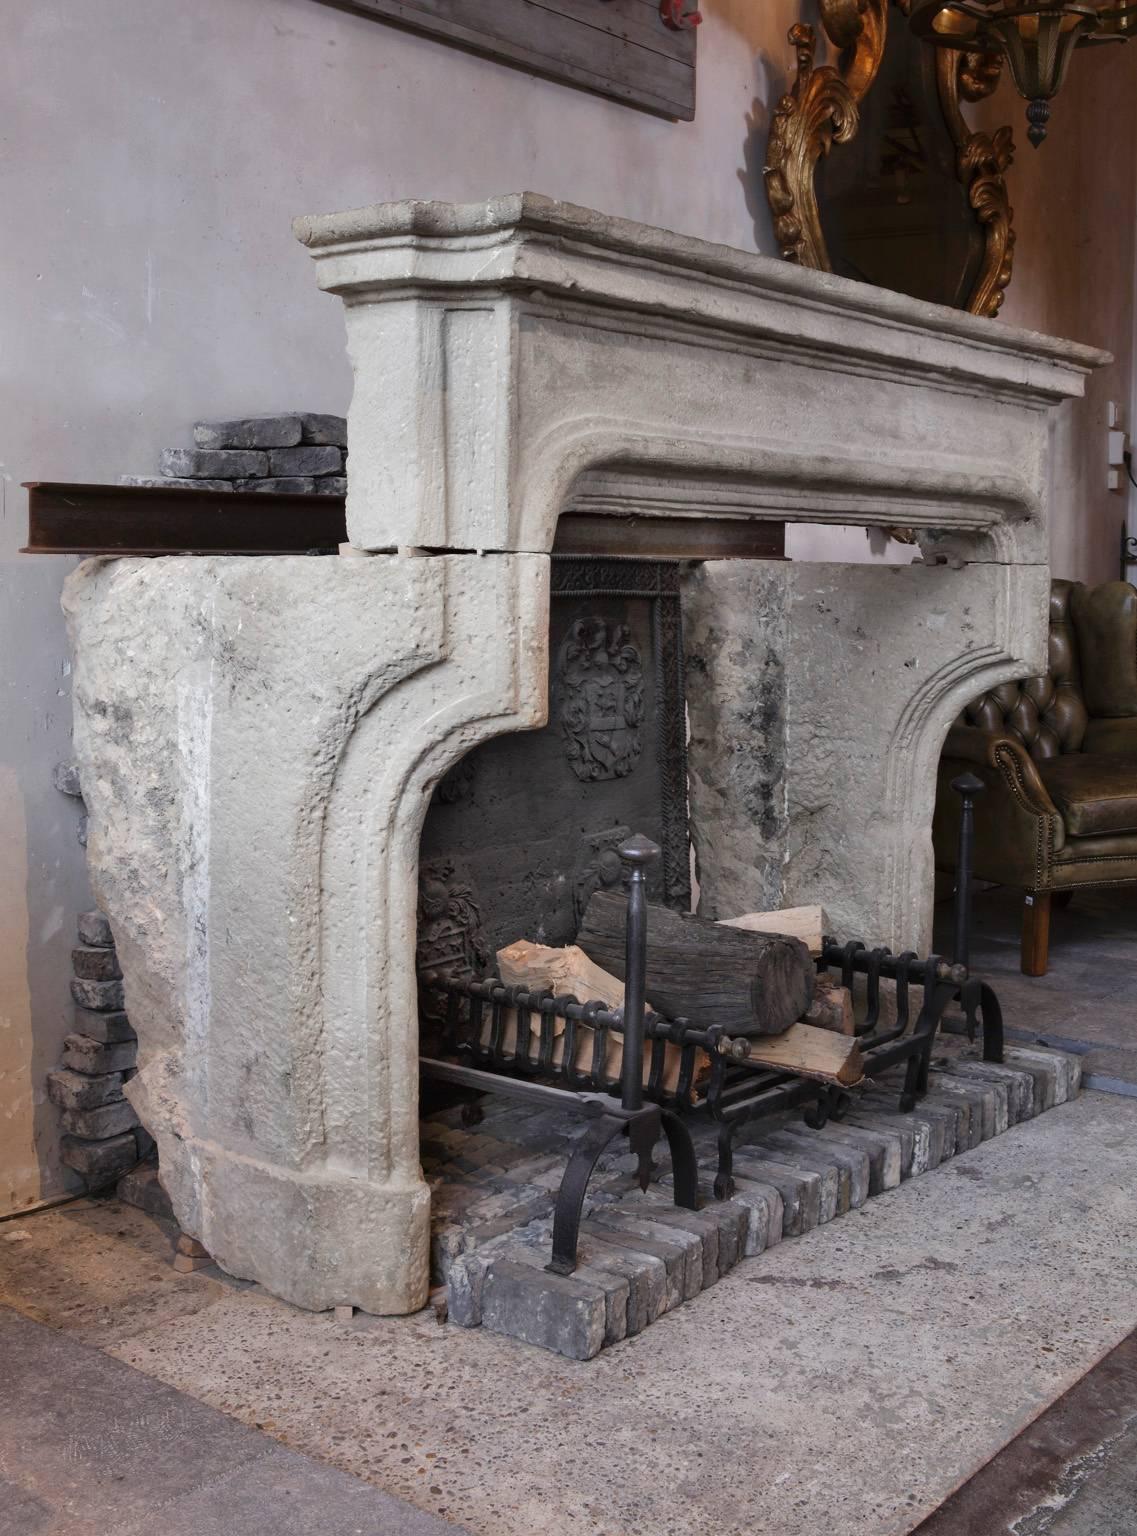 An exceptional late 16th / early 17th century French limestone fireplace or mantel with both Gothic and Louis XIII stylistic elements, respectively the pointedly arched legs and the roundedly profiled front.

Dimensions: 143 cm. high x 189 cm.